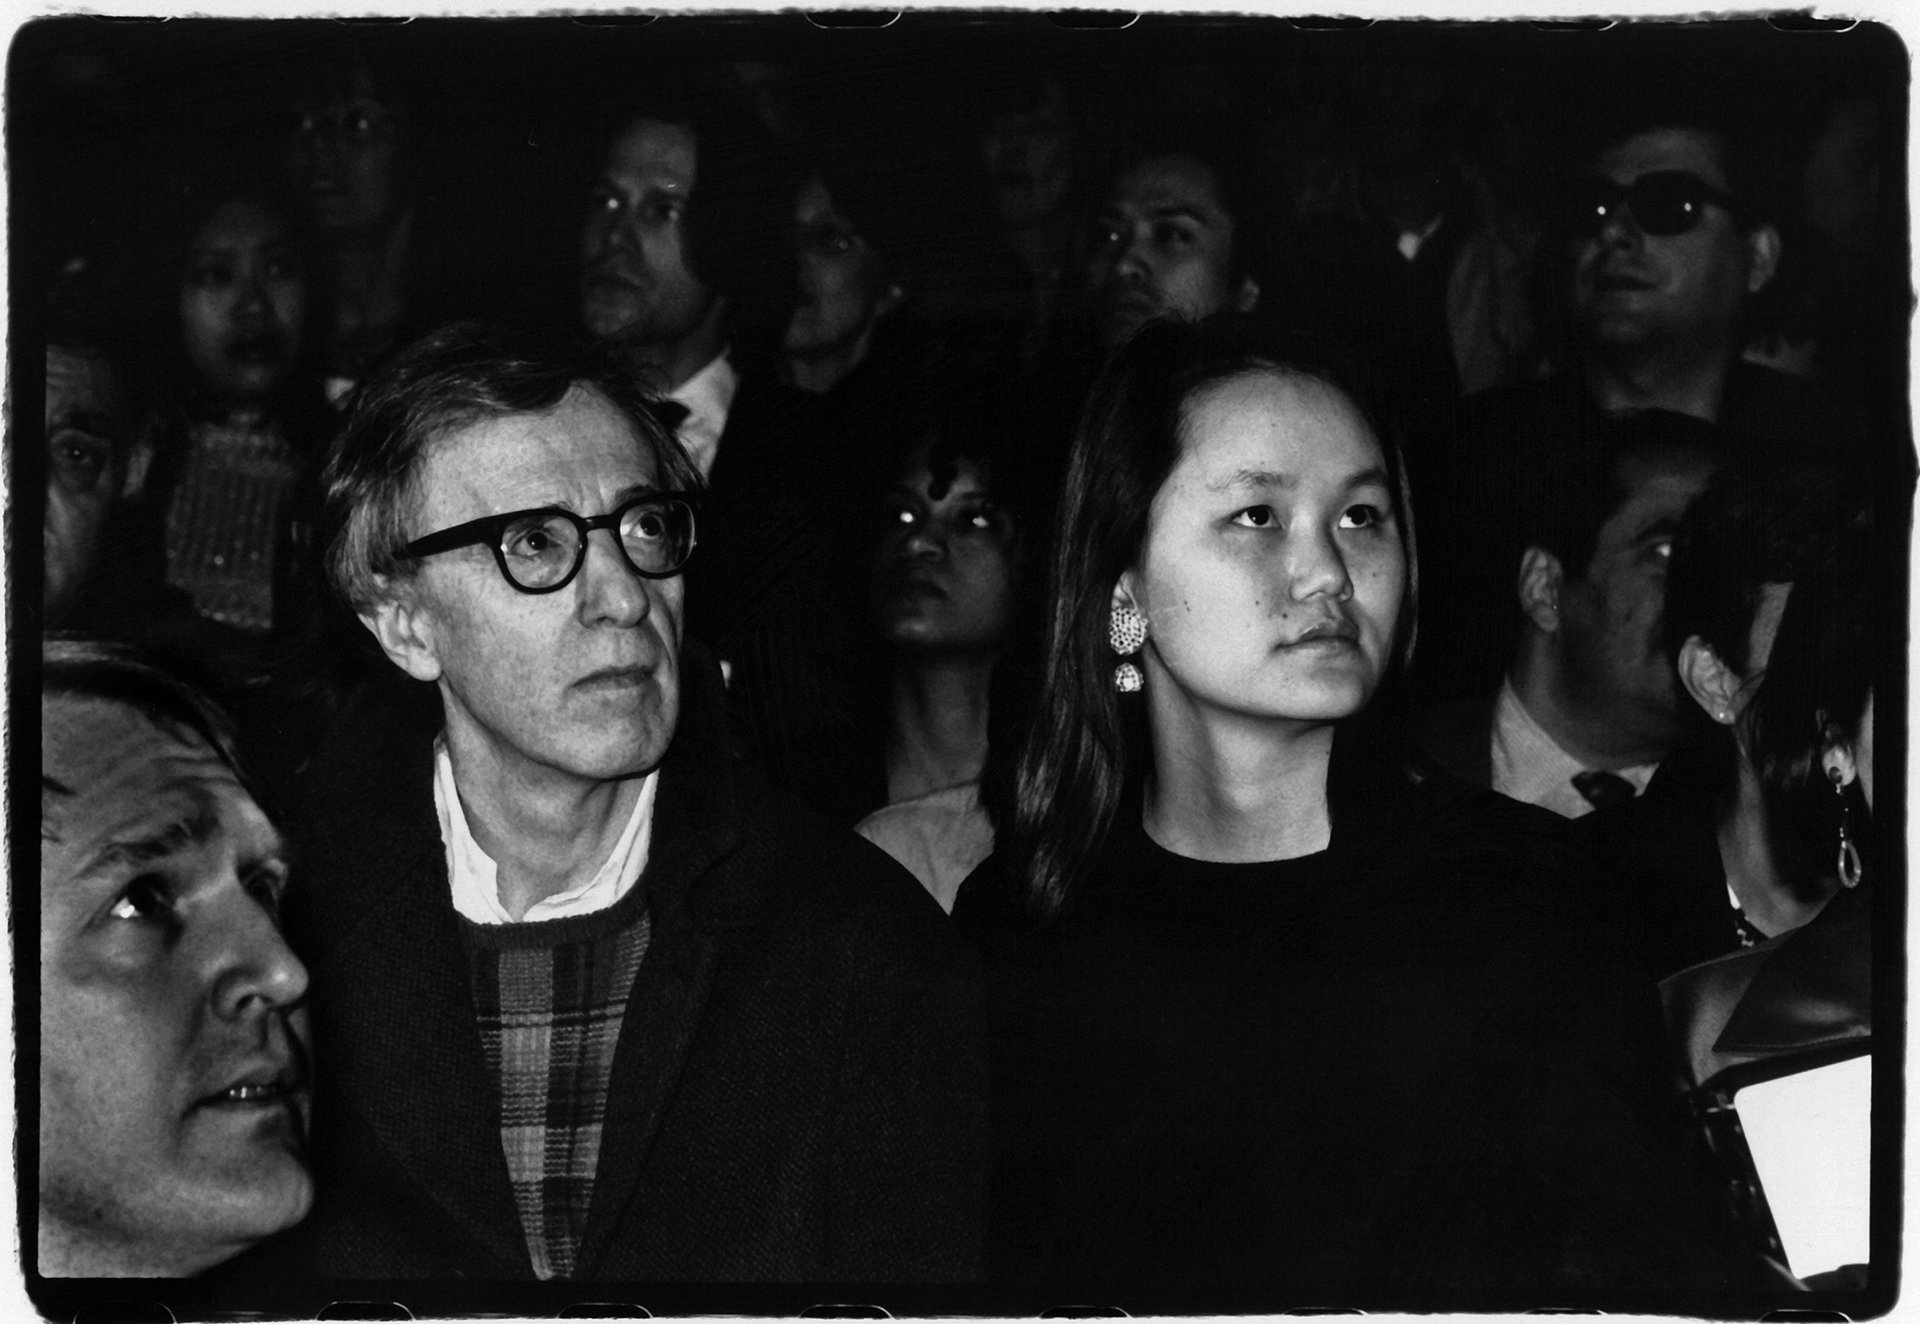 Woody Allen and Soon Yi Previn at a fashion show in 1996